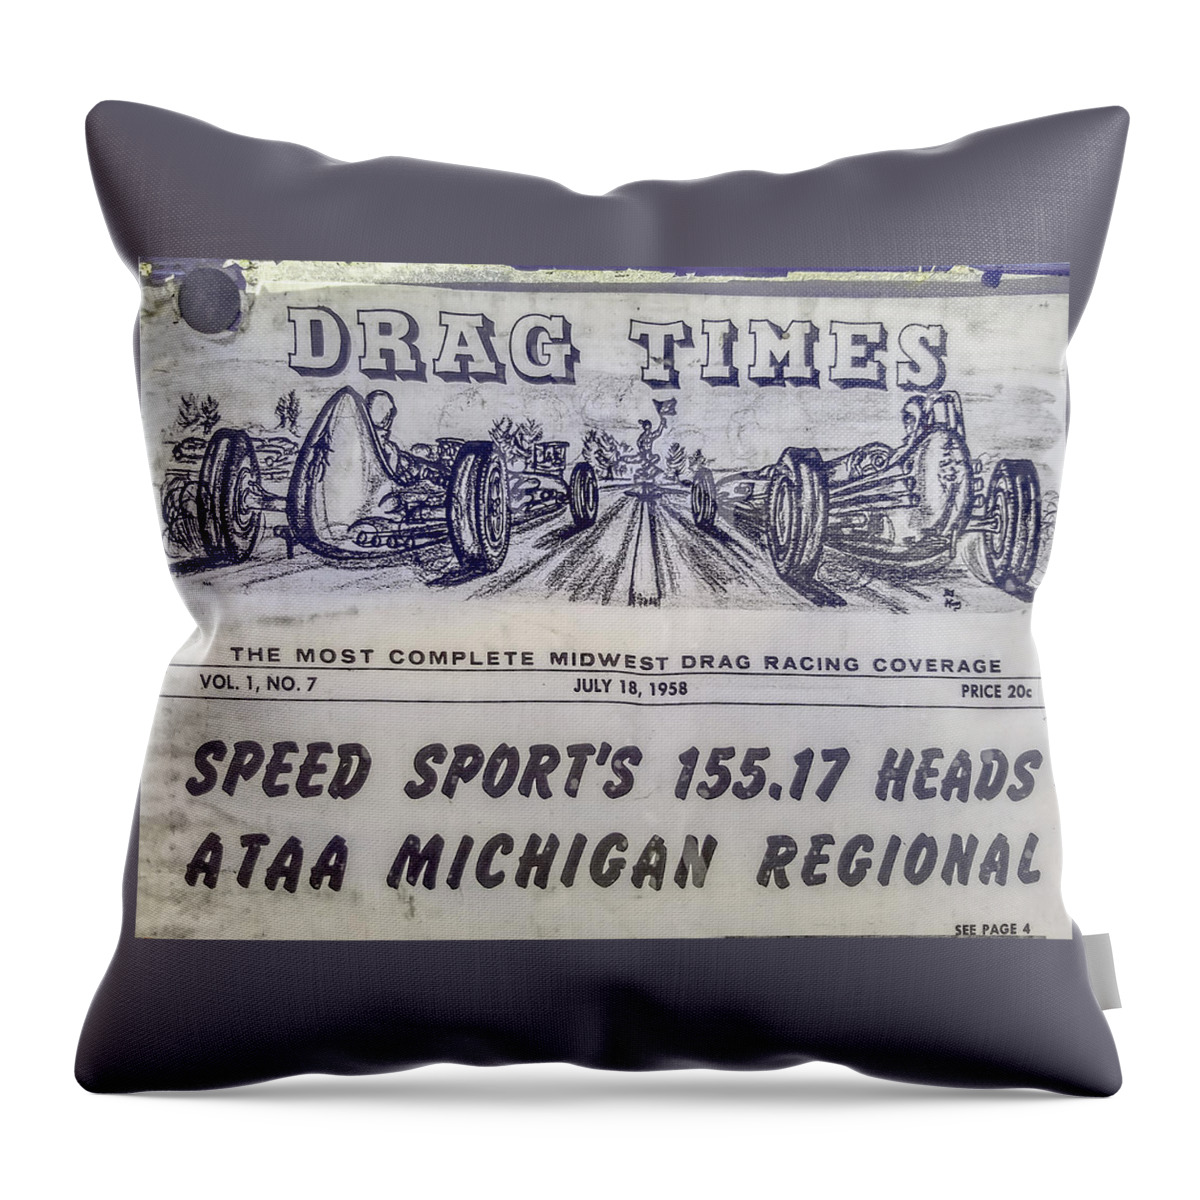 Nitro Throw Pillow featuring the digital art 1958 Drag Times by Darrell Foster